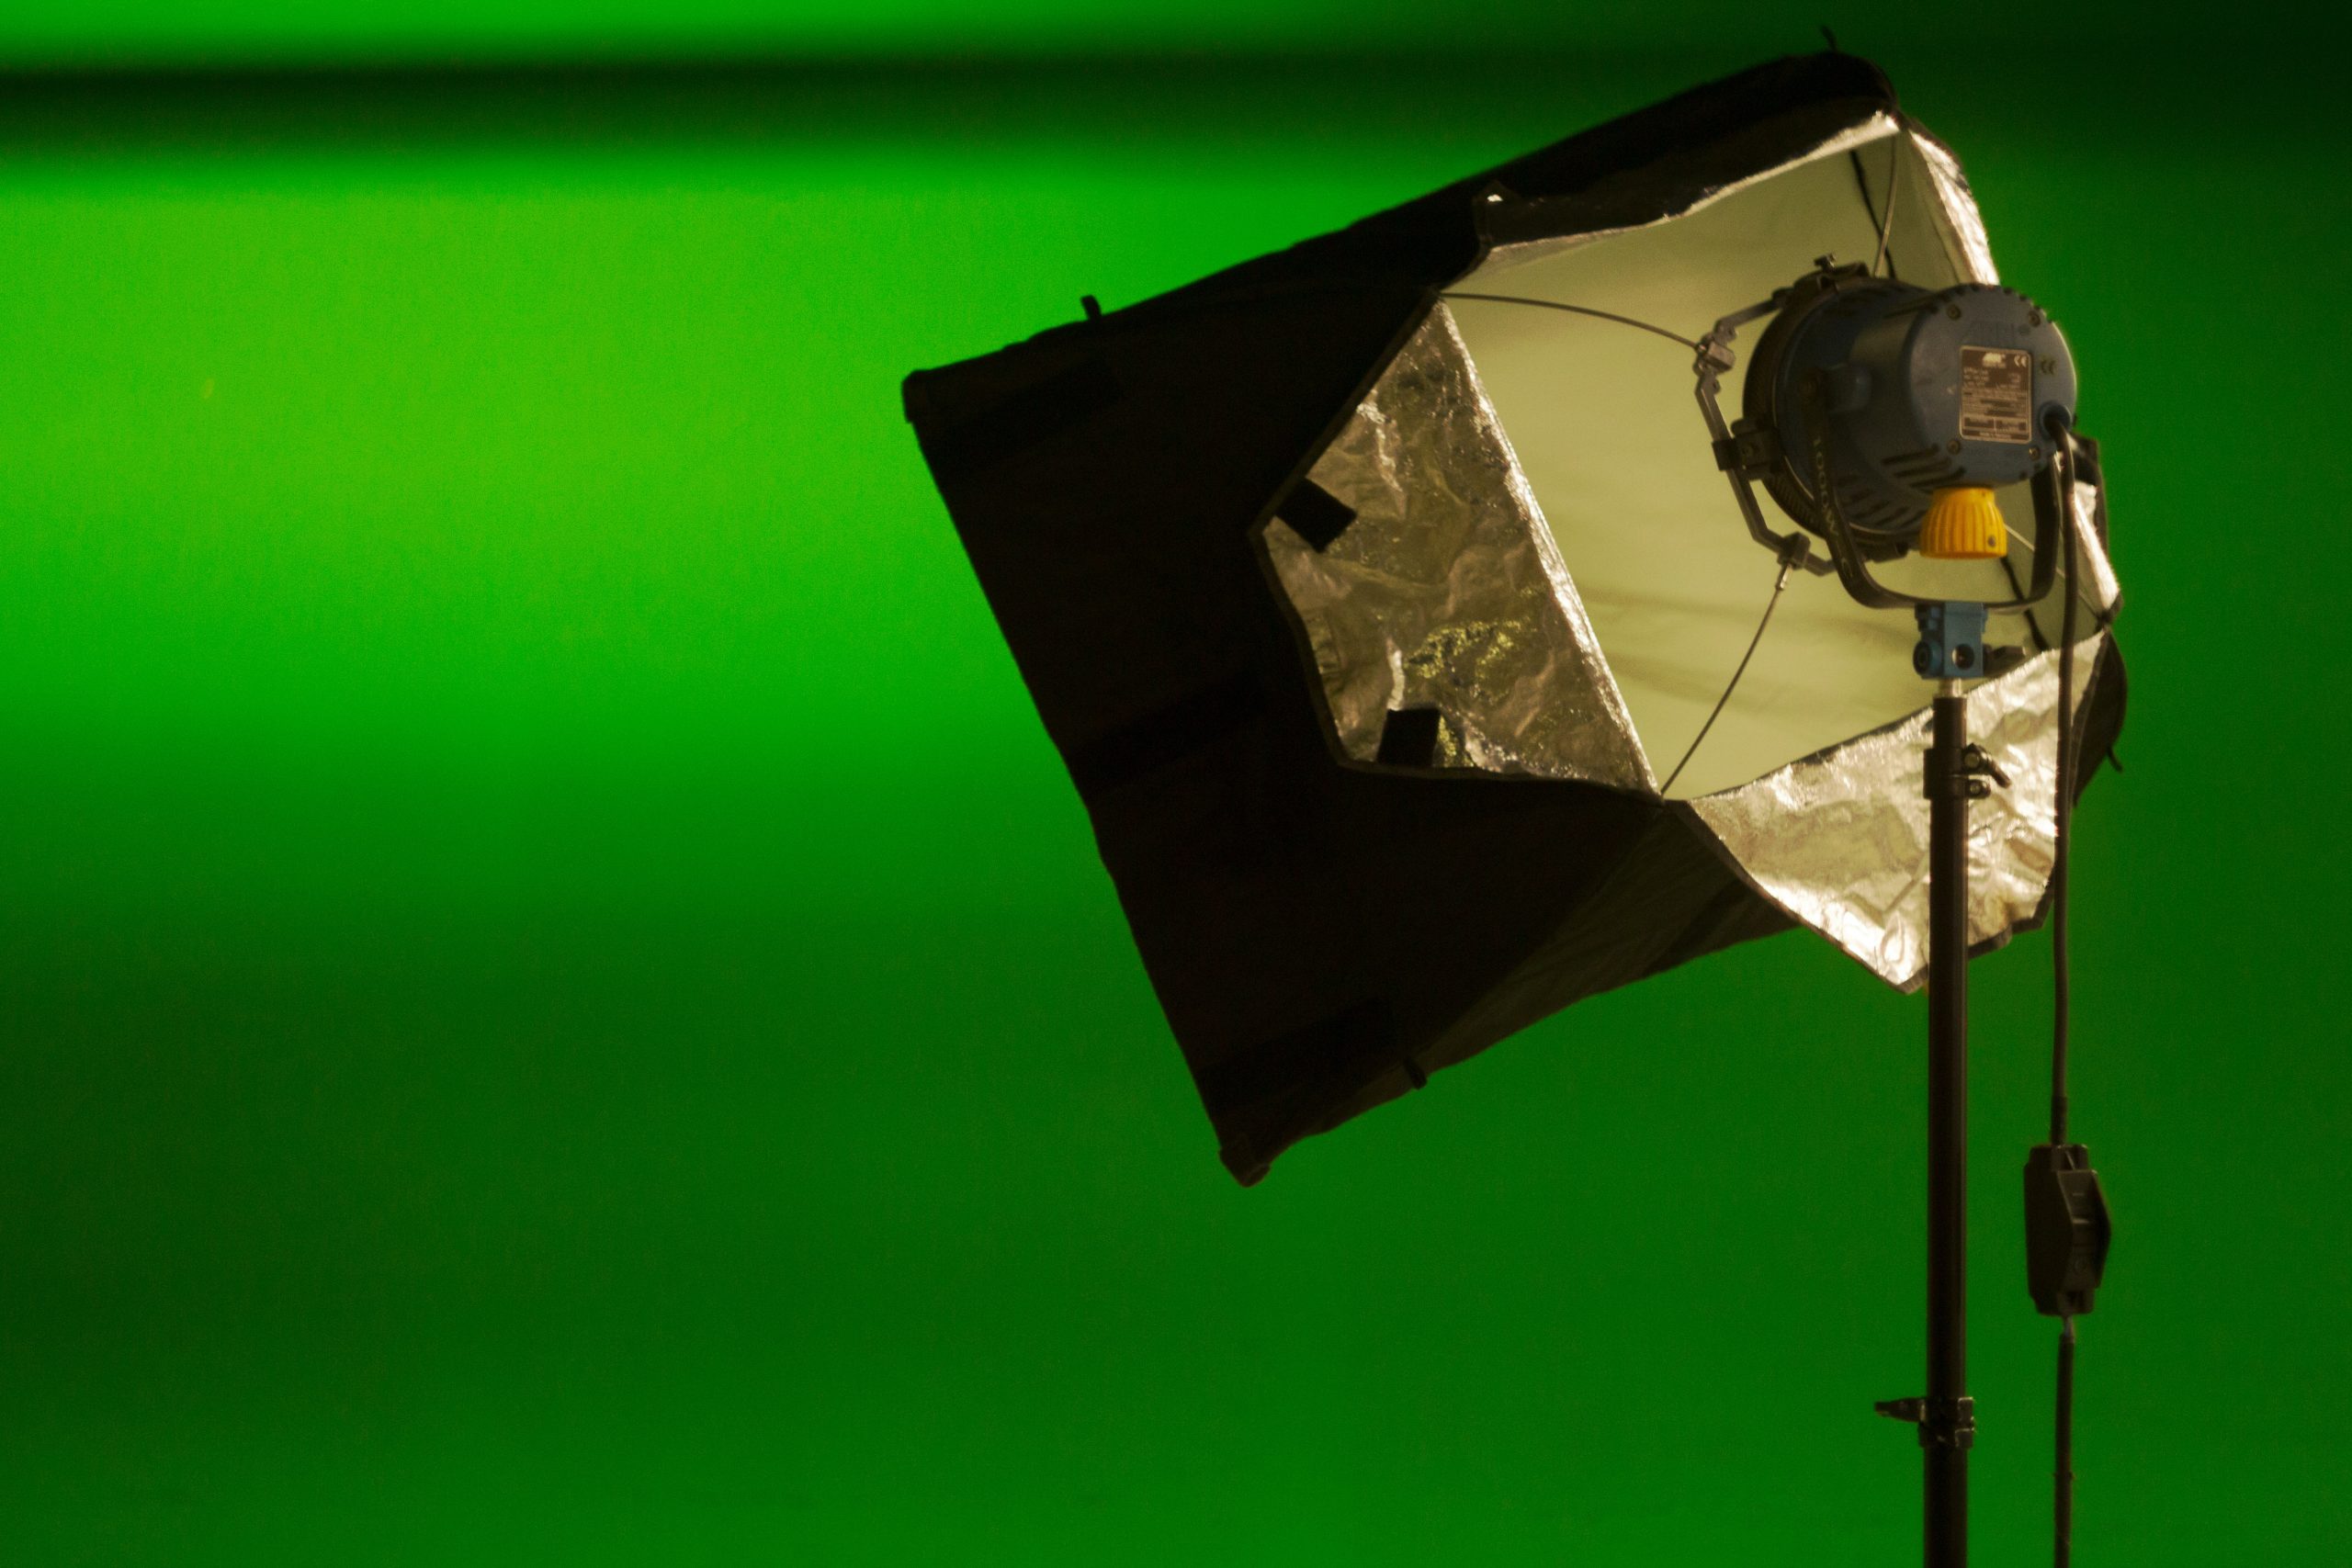 How to setup and film a green screen video